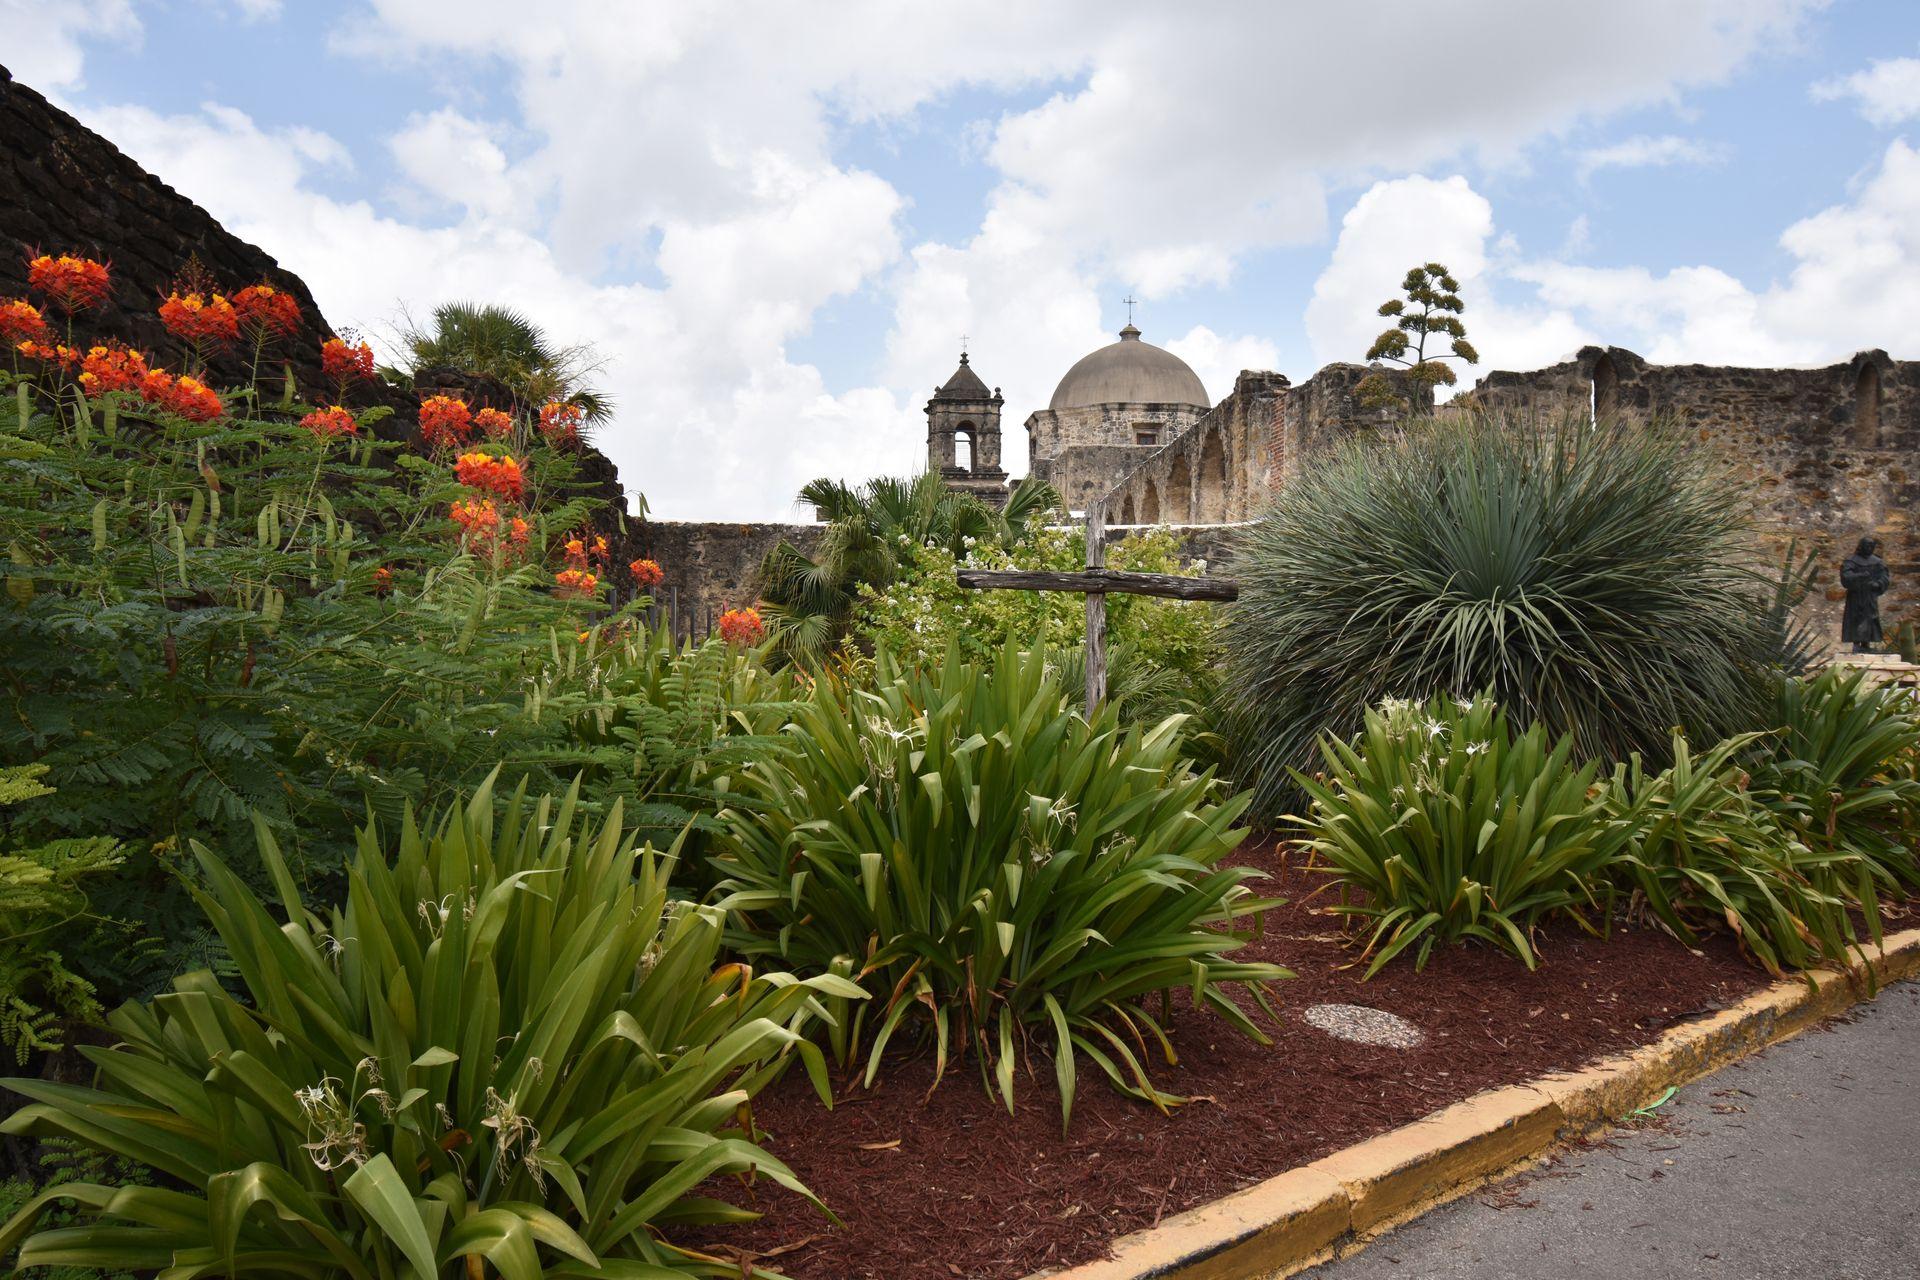 An area of greenery and orange flowers with the dome of Mission Concepcion in the background.